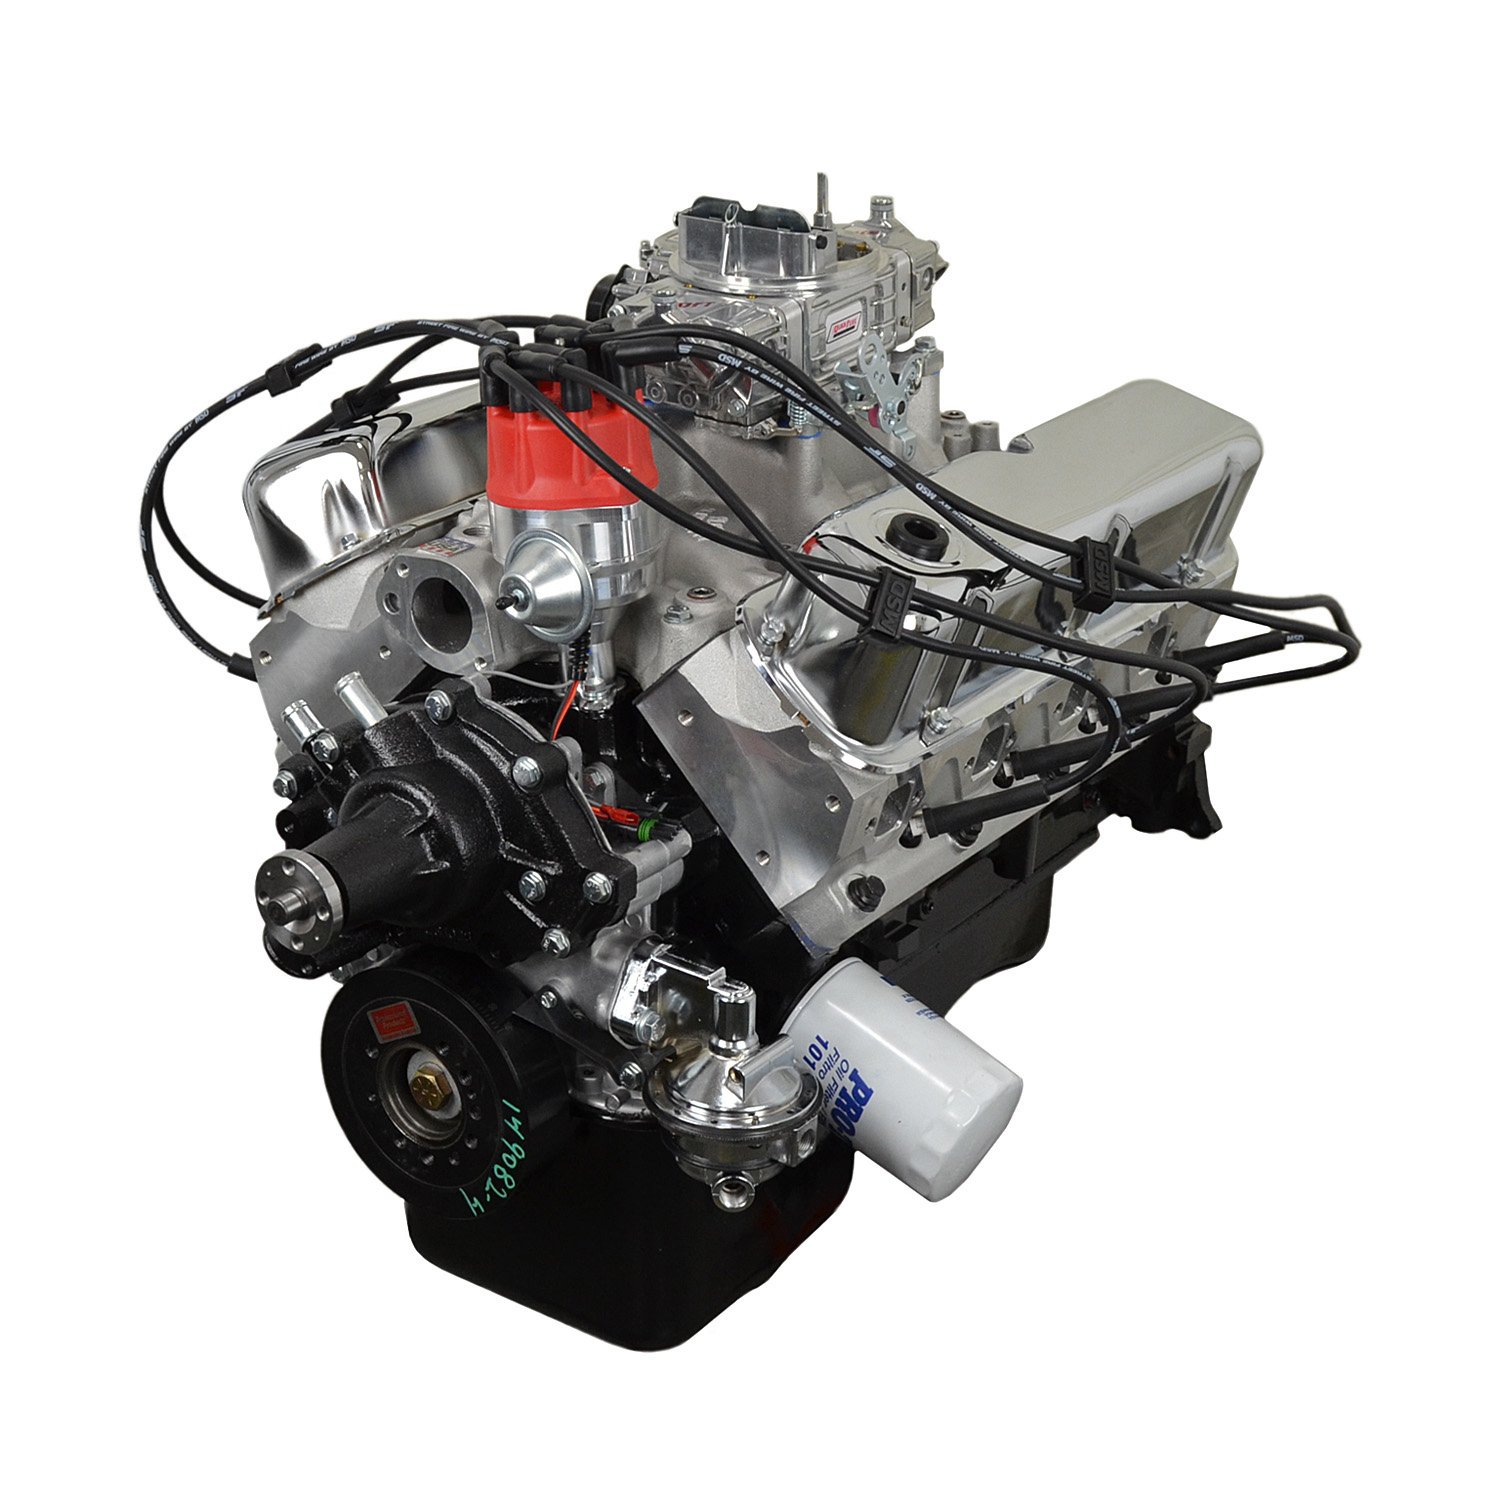 HP100C High Performance Crate Engine Small Block Ford 347ci / 450HP / 440TQ